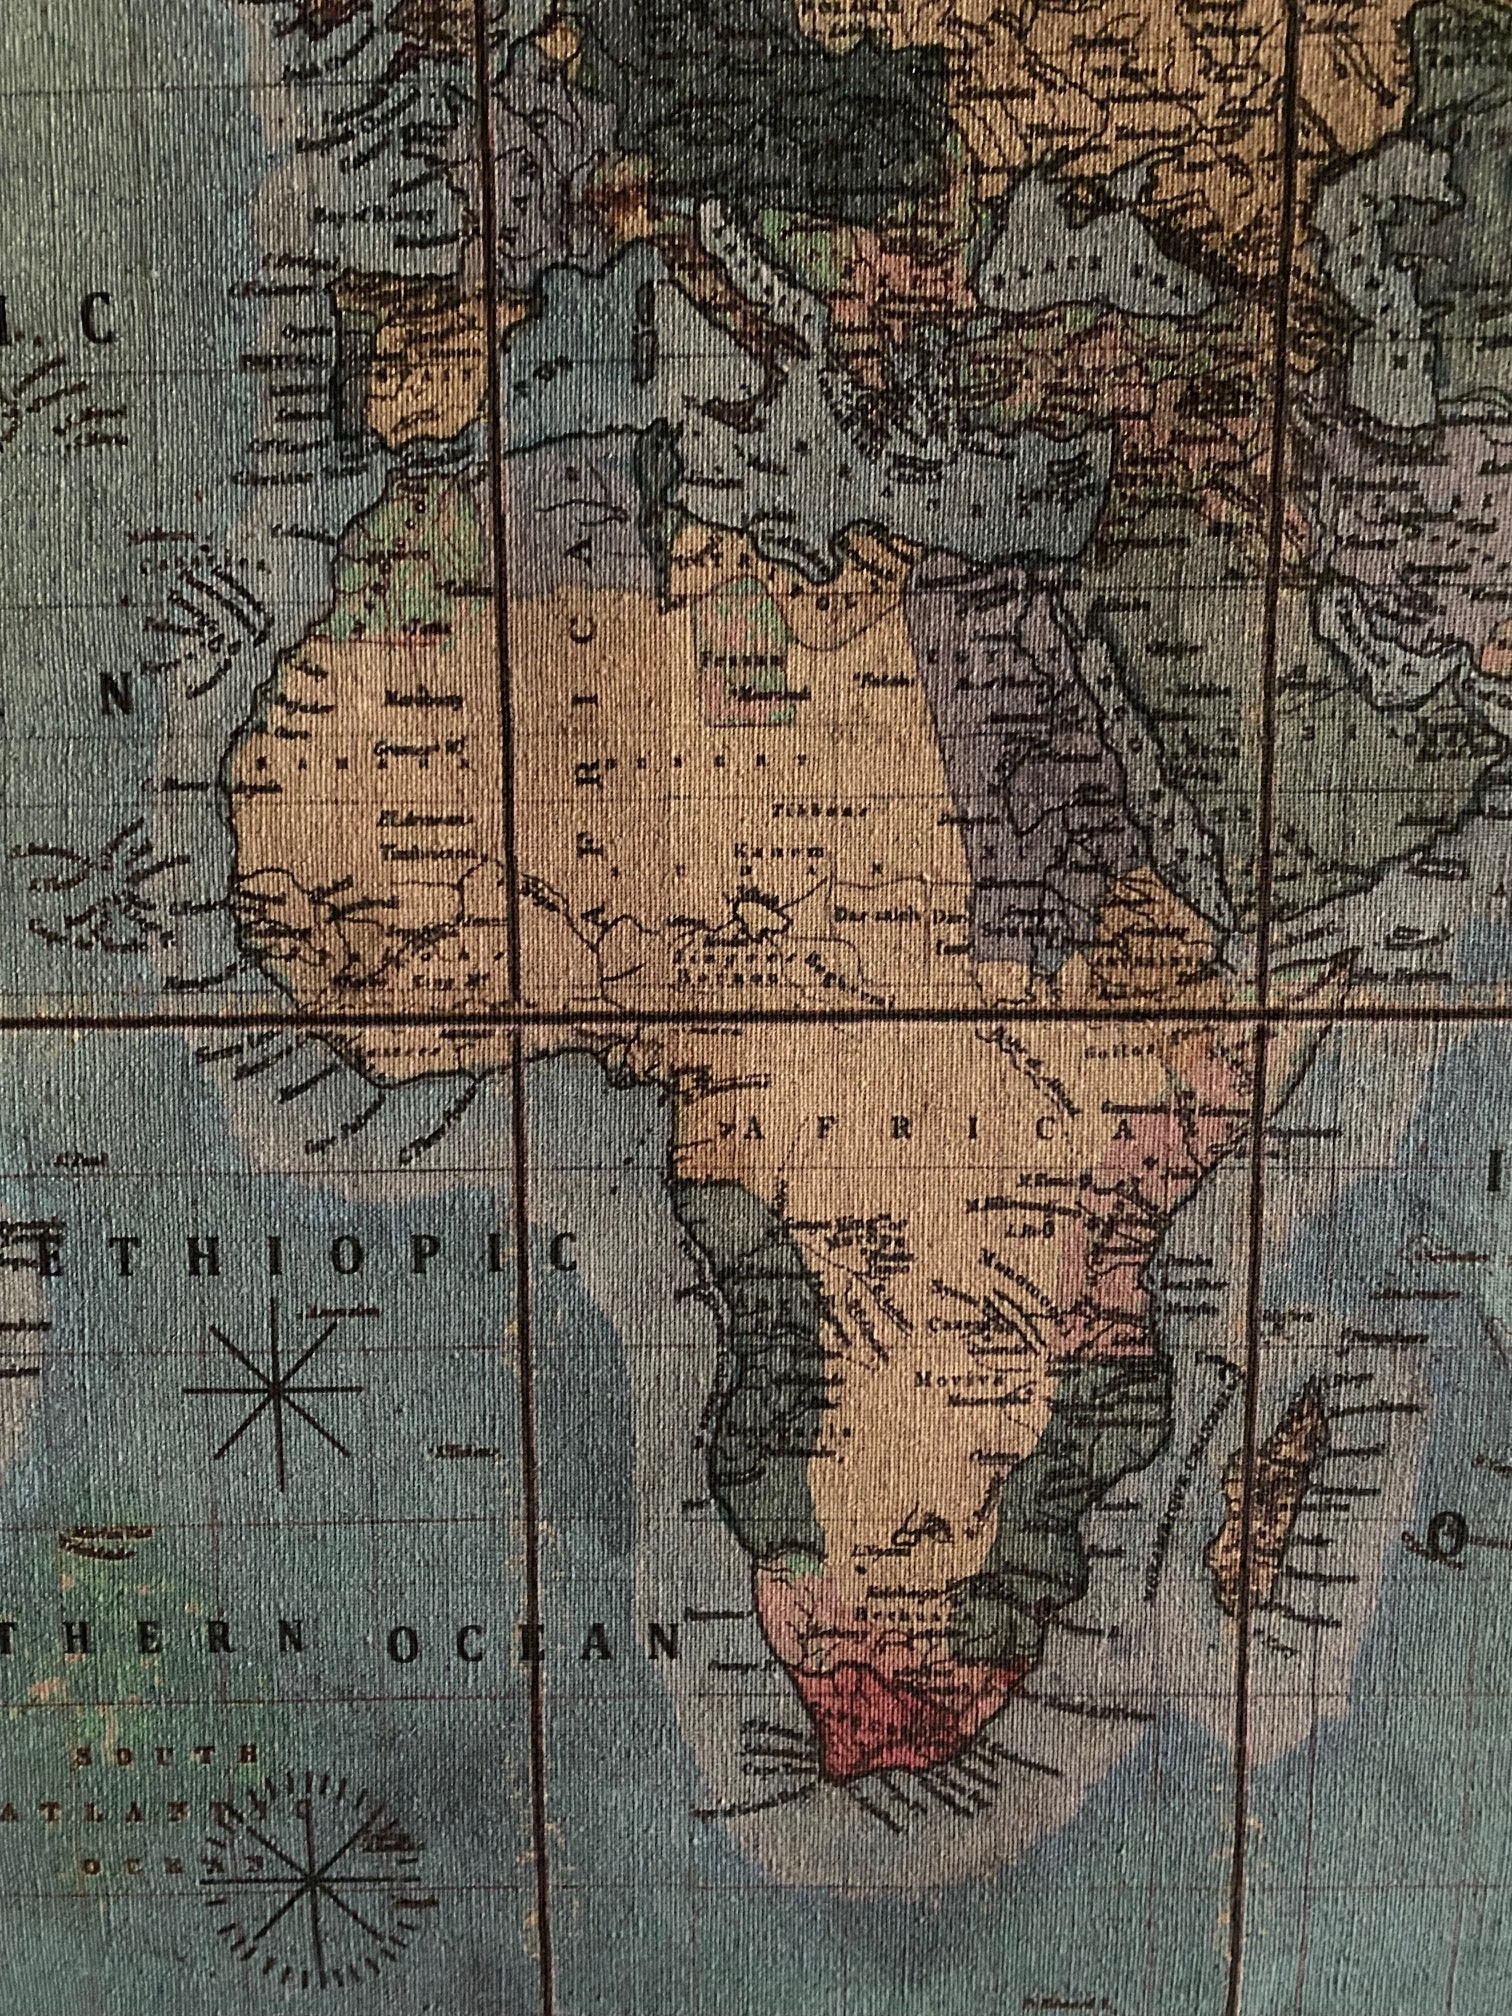 Vintage Fabric Map of the World